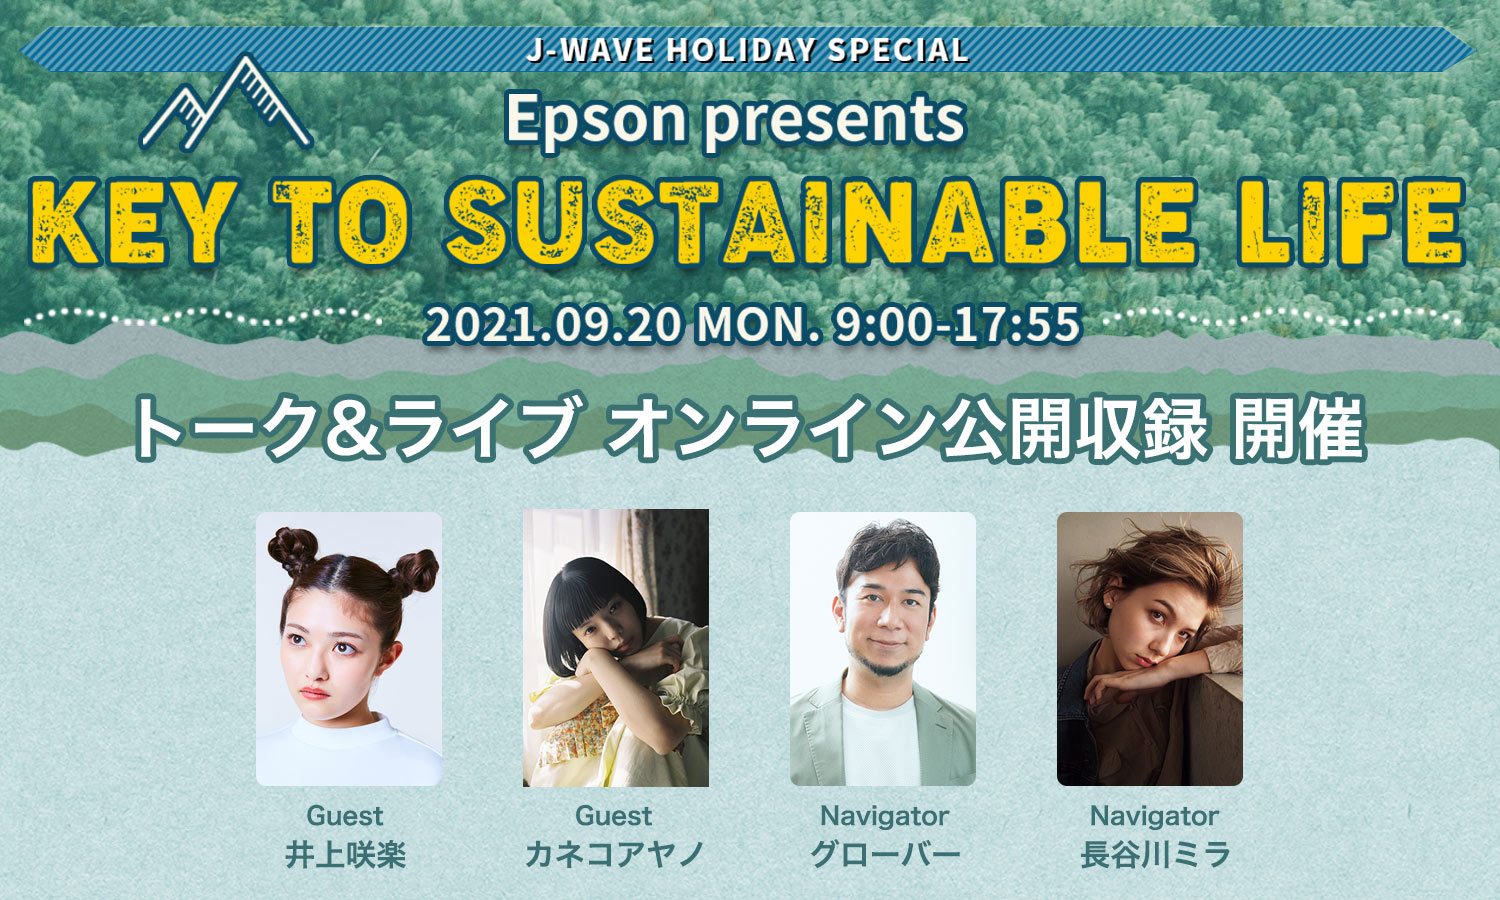 J-WAVE HOLIDAY SPECIAL 
Epson presents KEY TO SUSTAINABLE LIFE トーク&ライブ オンライン公開収録　開催